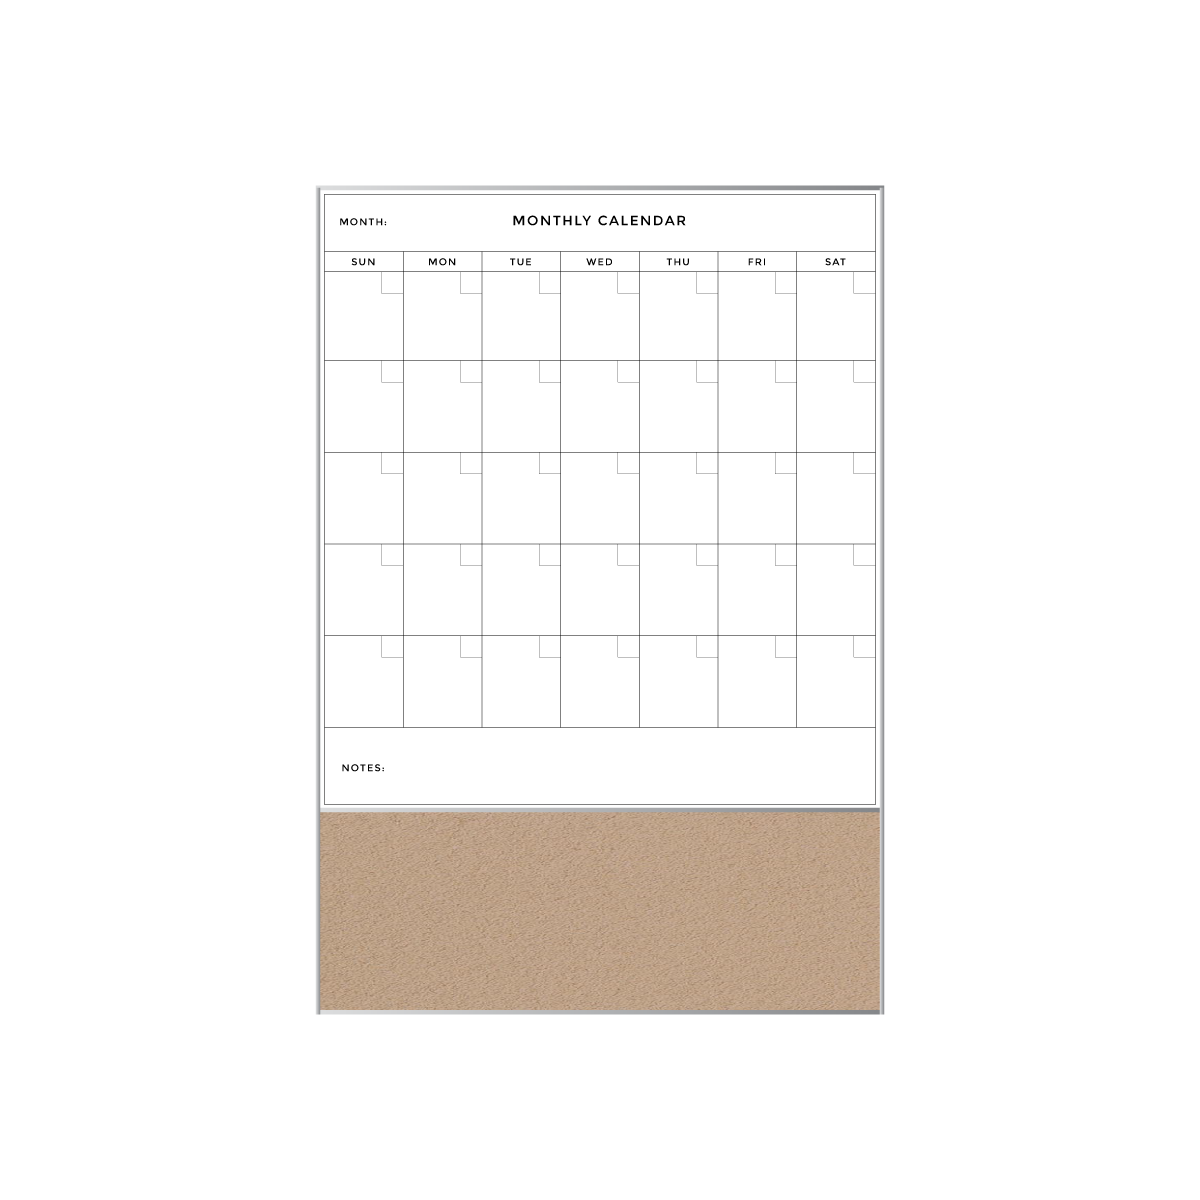 Combination Monthly Calendar | Blanched Almond FORBO | Satin Aluminum Minimalist Frame Portrait